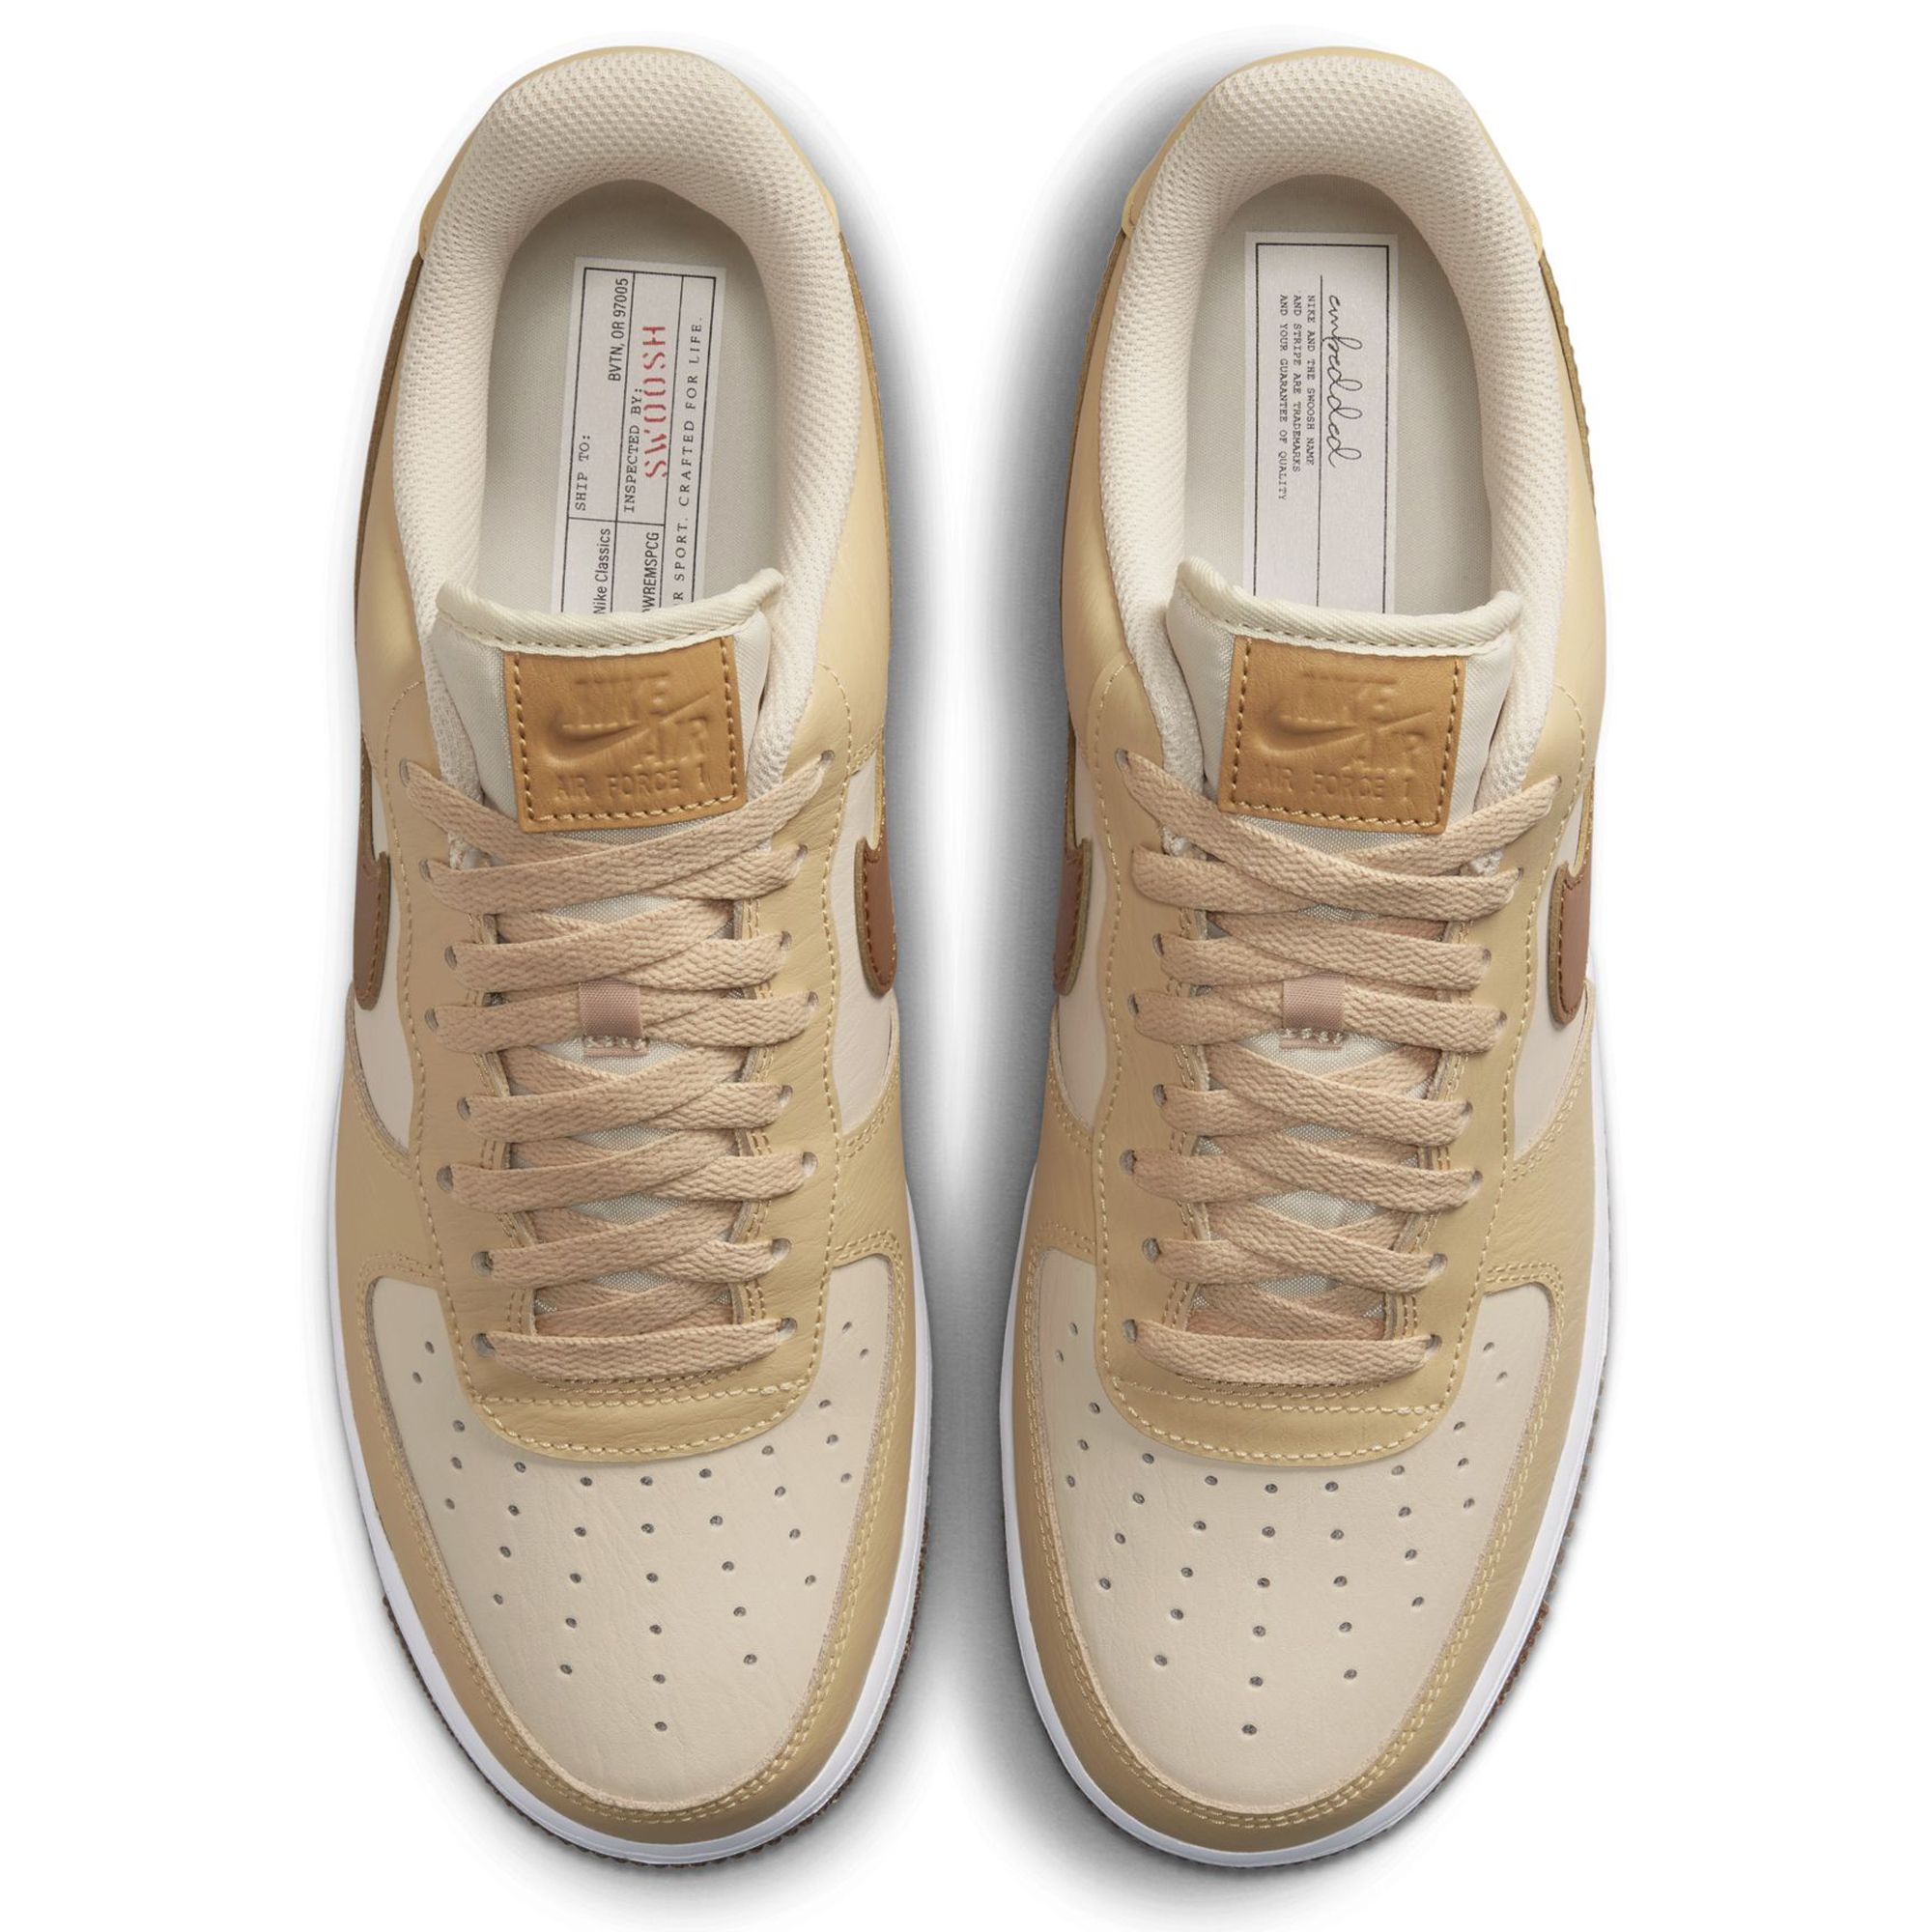 Buy Nike Air Force 1 Low '07 LV8 Inspected by Swoosh - Stadium Goods